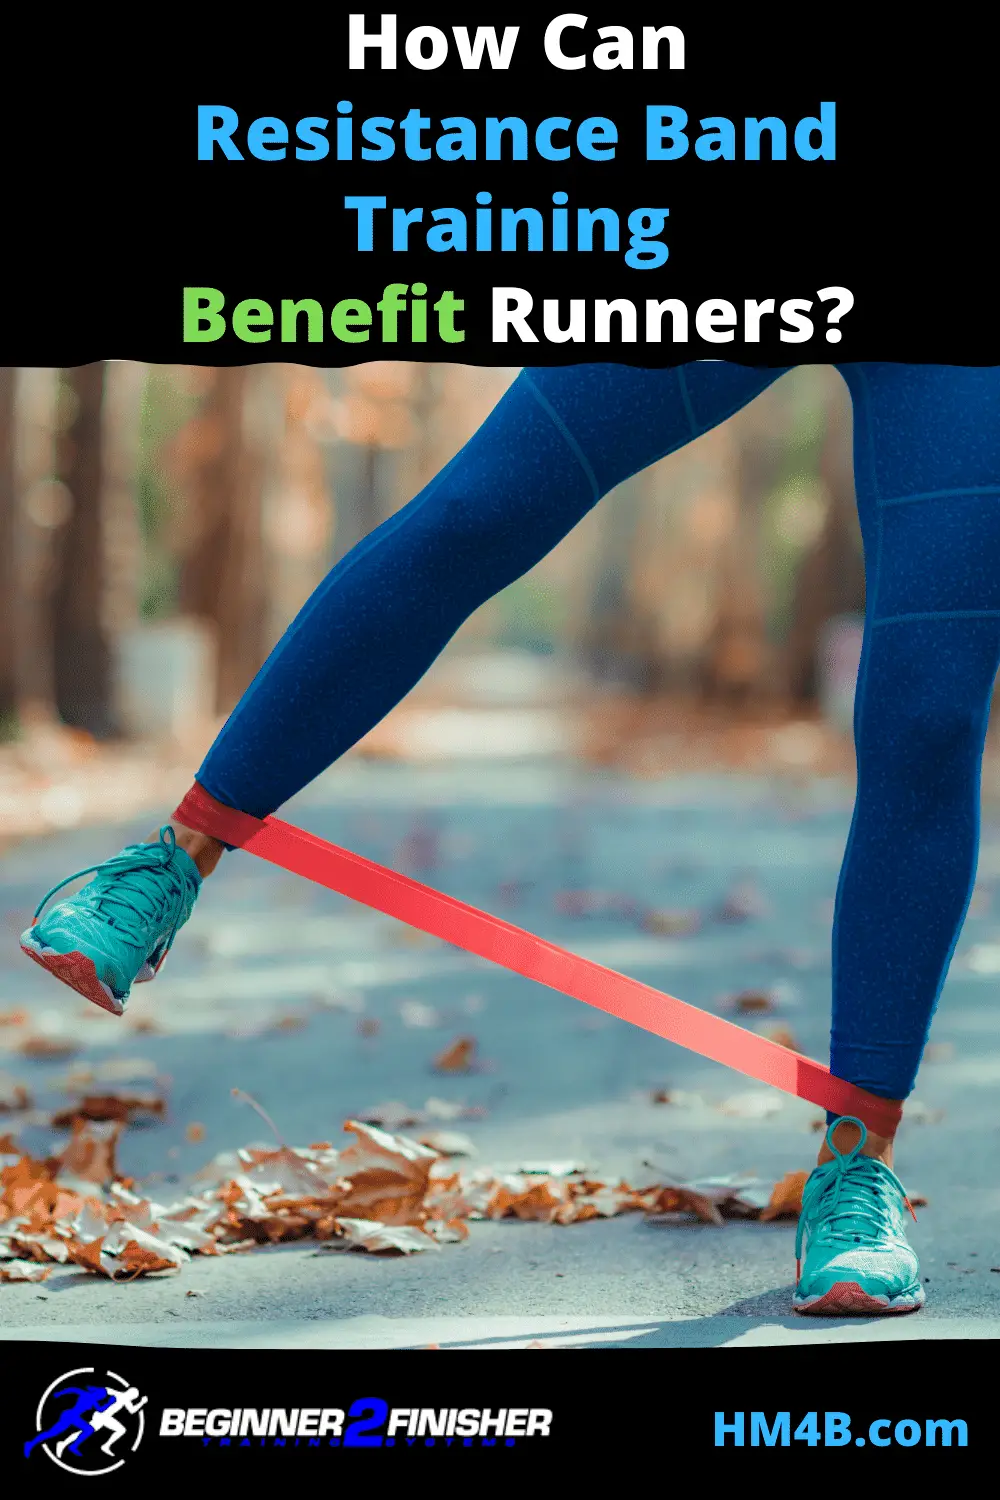 What is Resistance Band Training? How Can It Help Runners?